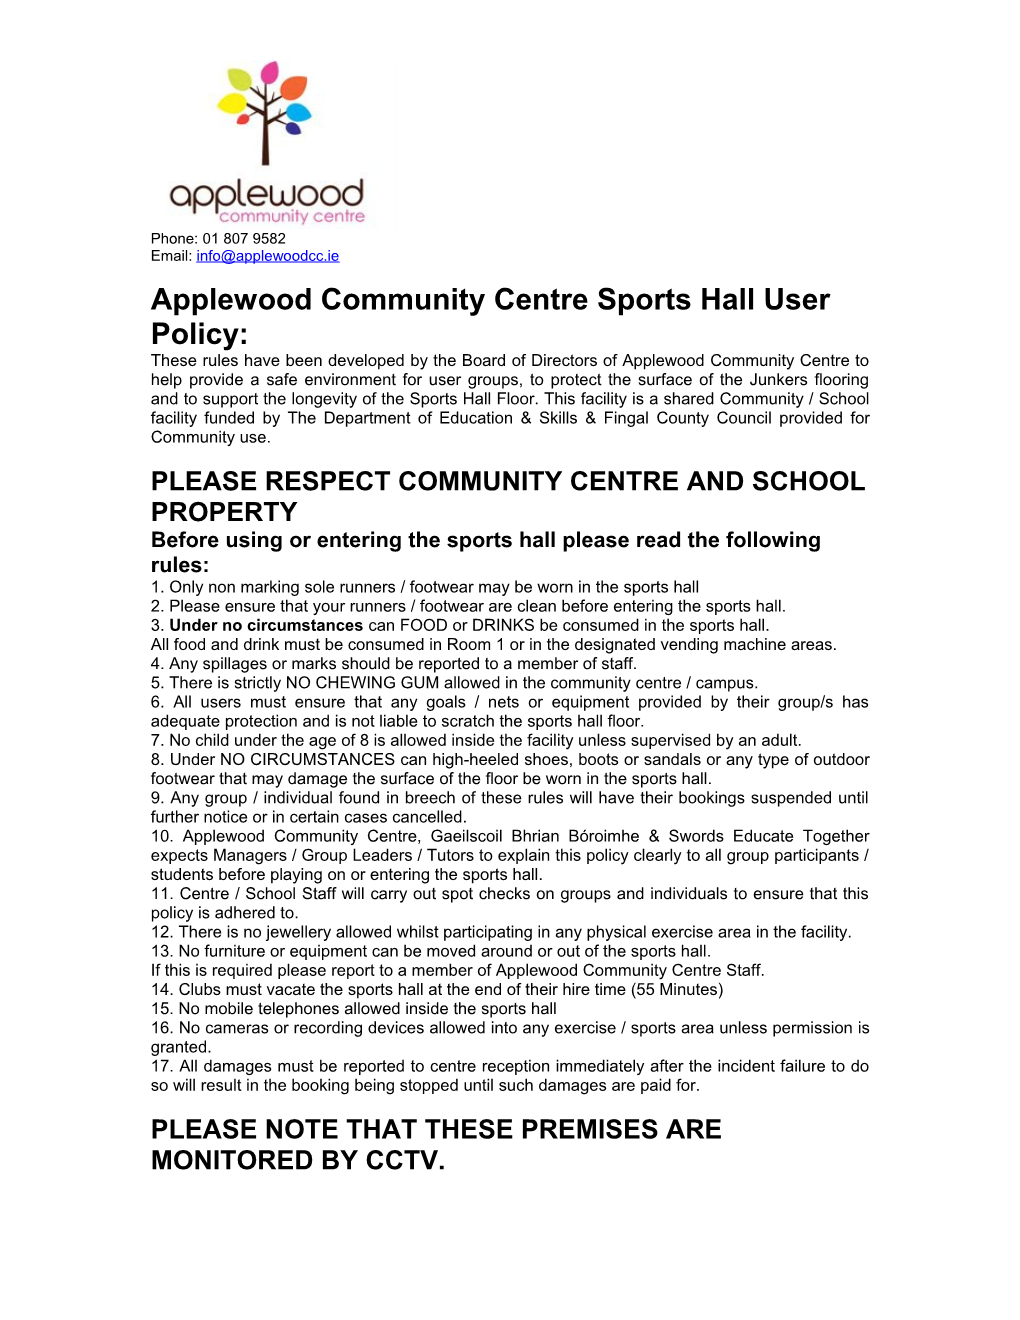 Applewood Community Centre Sports Hall User Policy